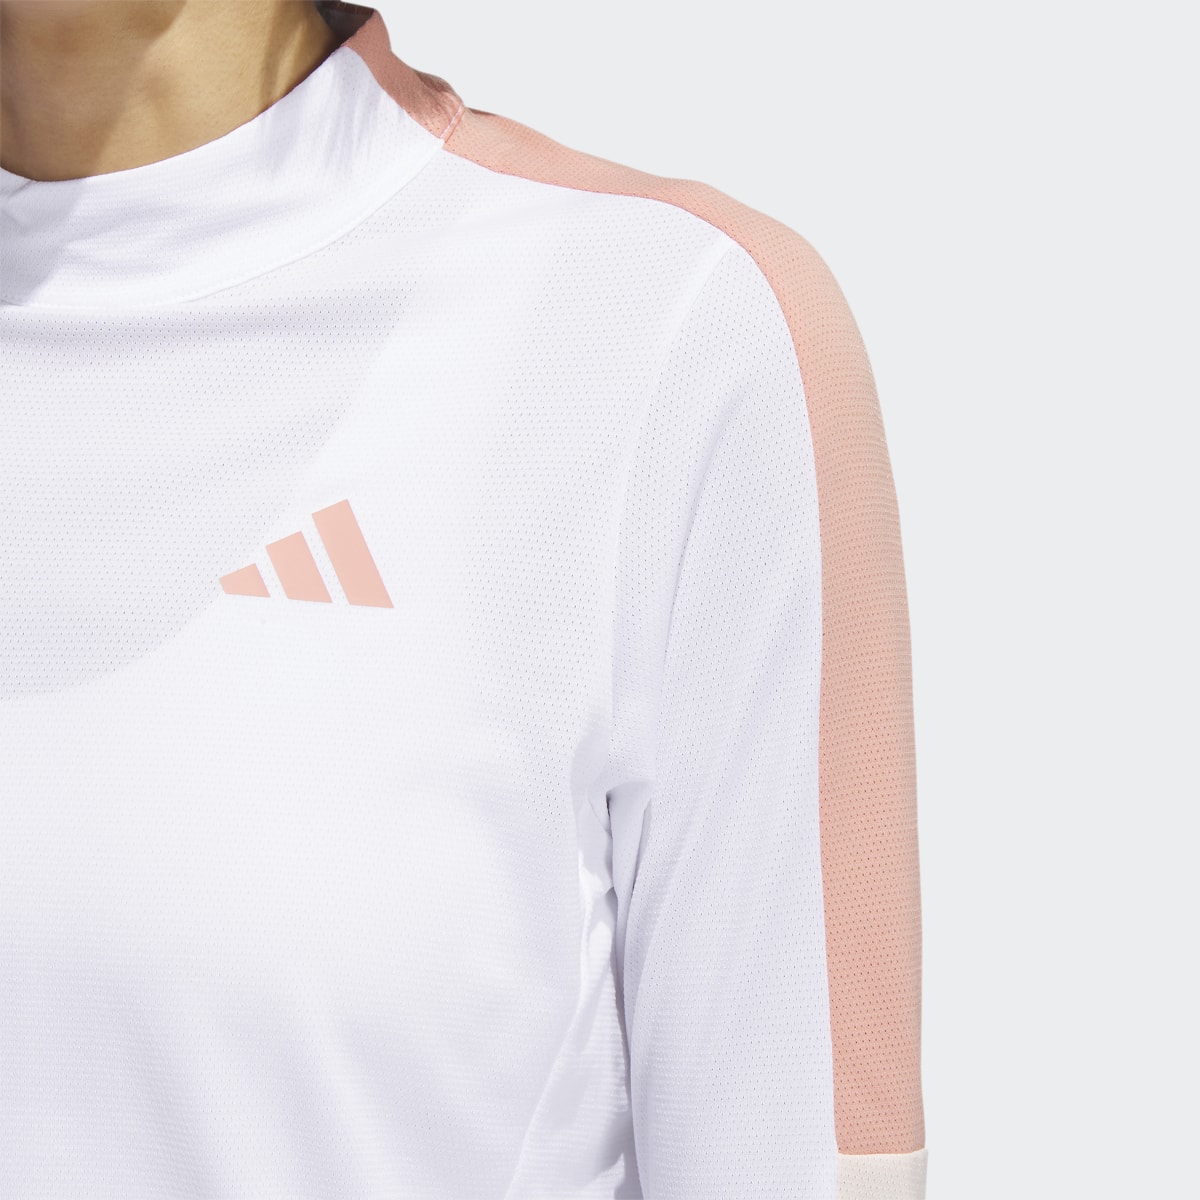 Adidas T-shirt Made With Nature Mock Neck. 7